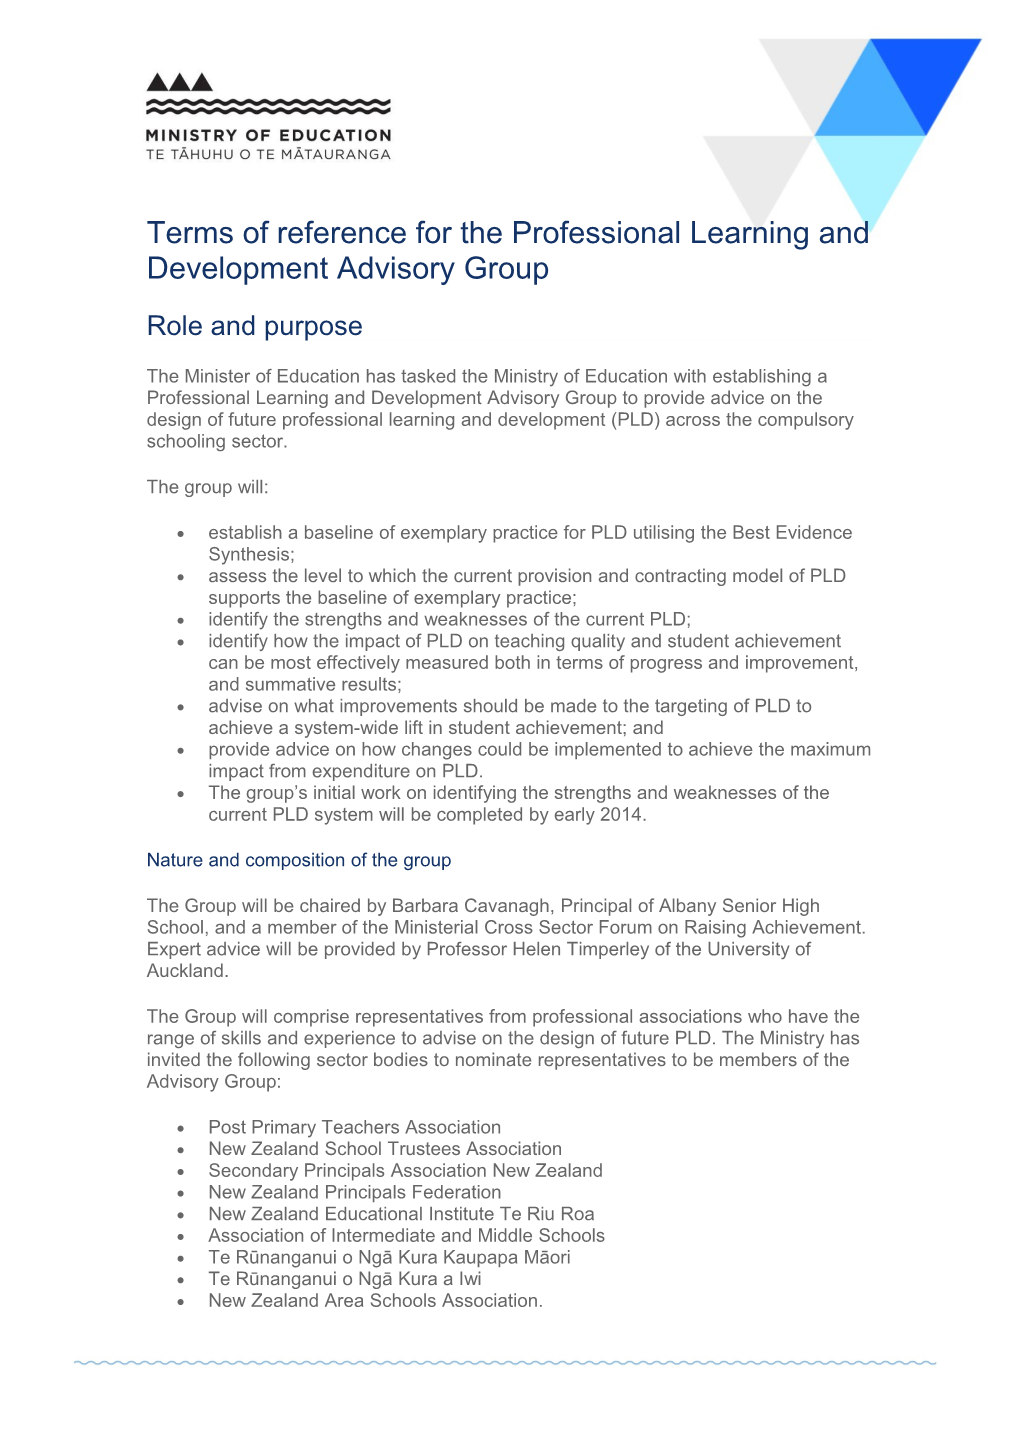 Terms of Reference for the Professional Learning and Development Advisory Group